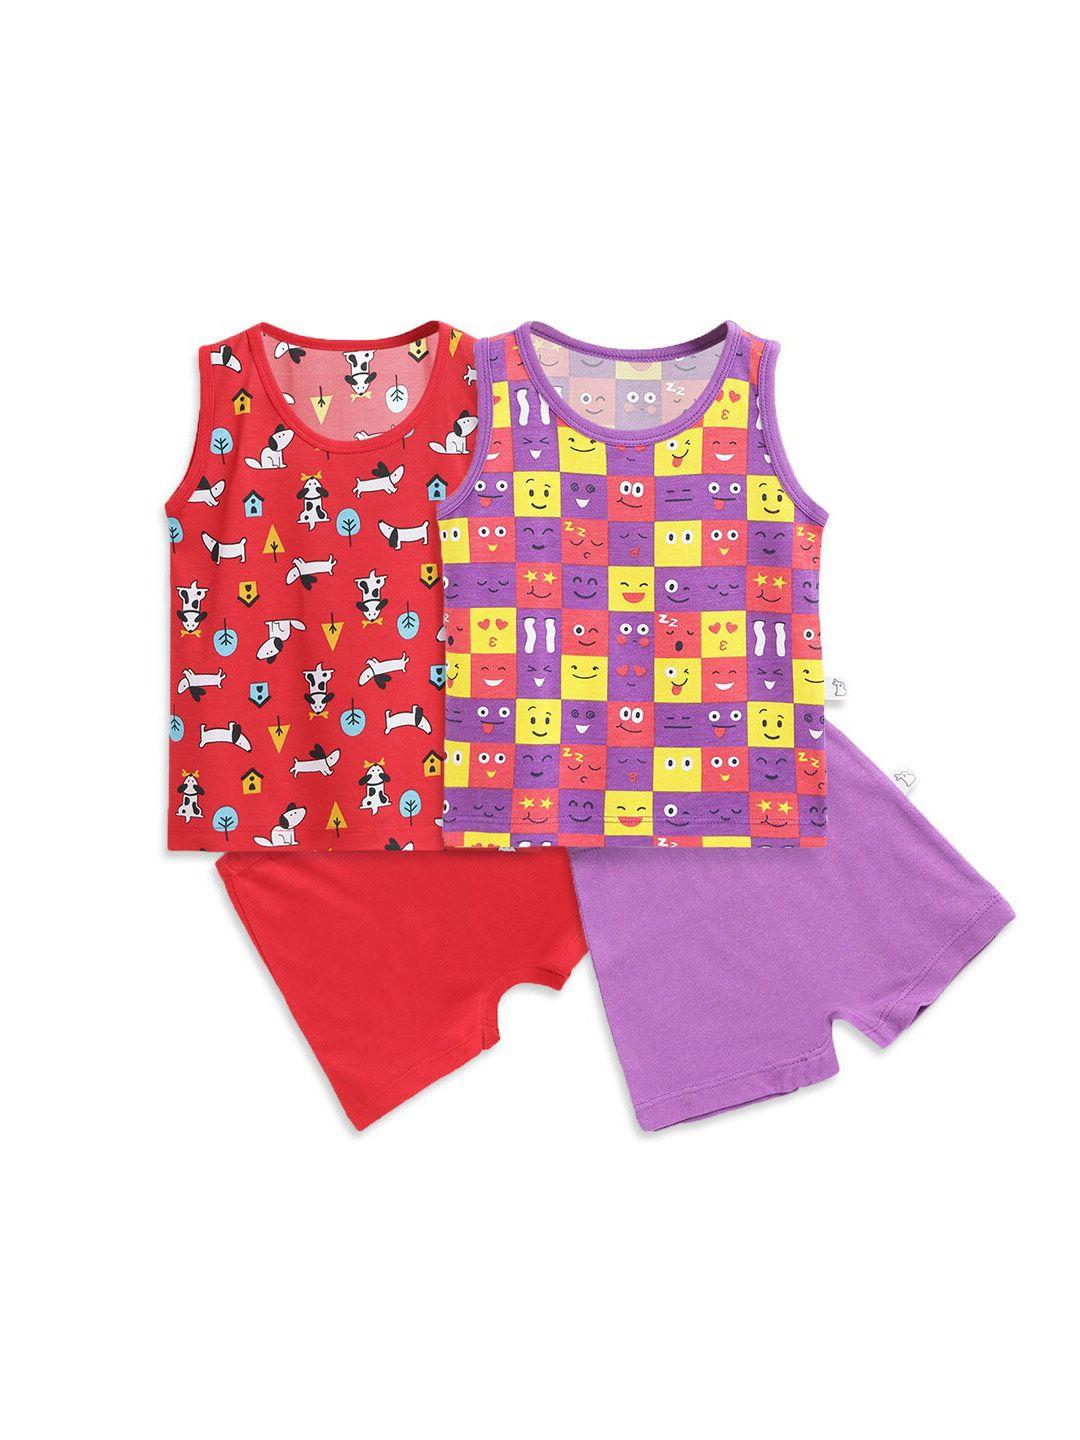 superbottoms unisex kids set of 2 printed sustainable t-shirt with shorts